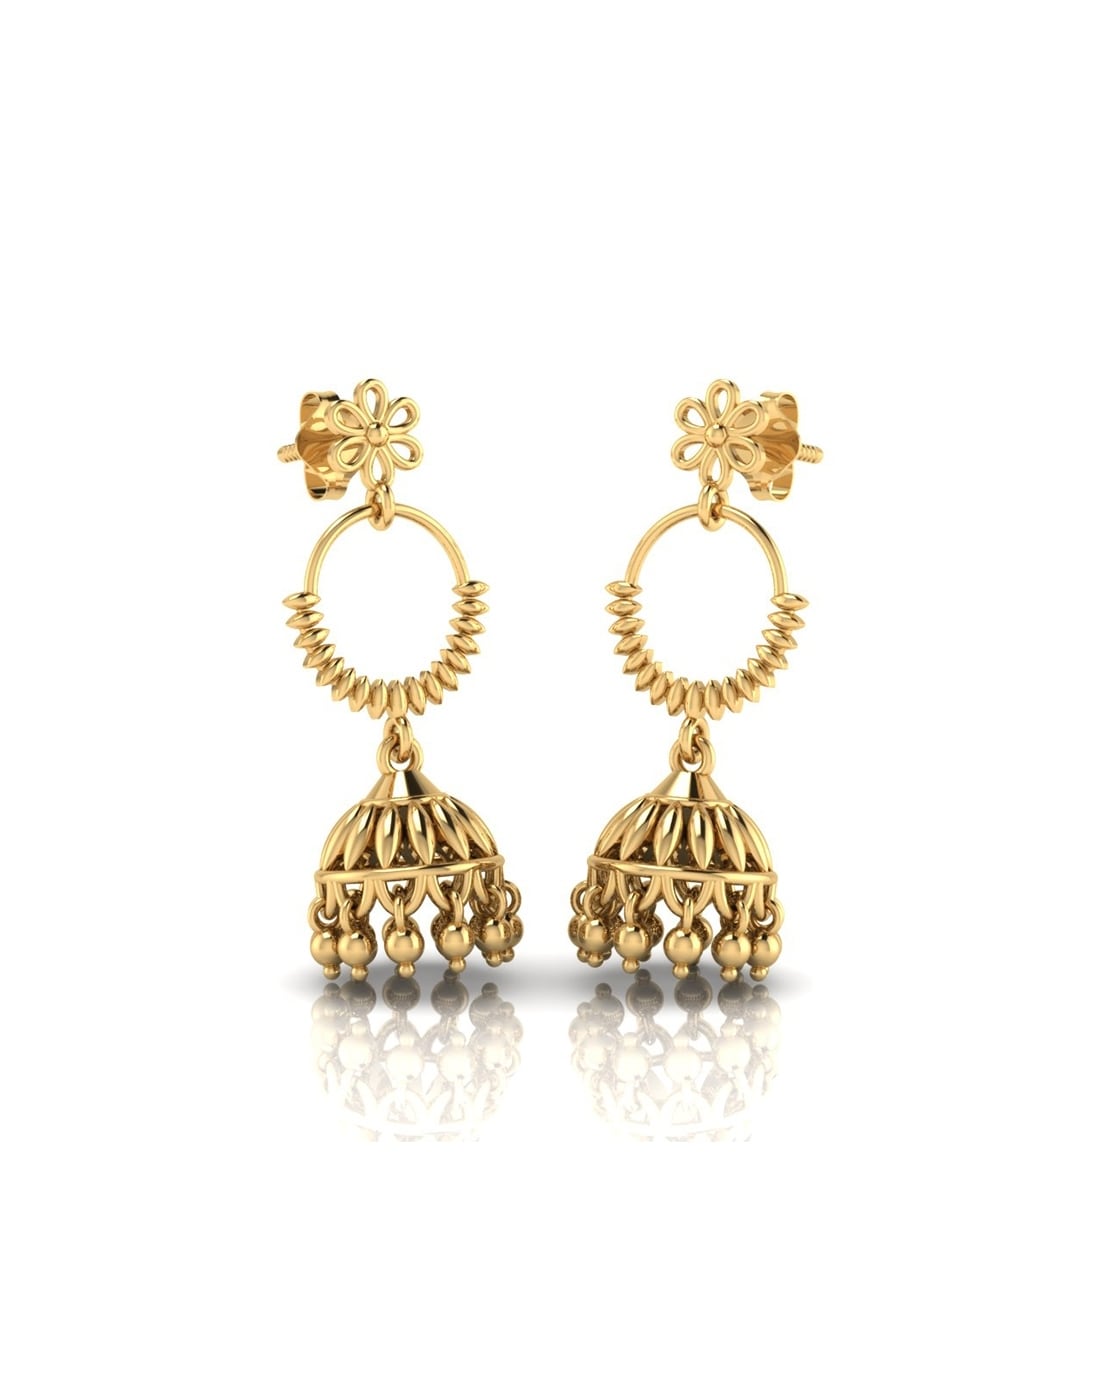 Latest light weight Gold jhumka earrings designs with weight and  priceTrisha gold art  YouTube